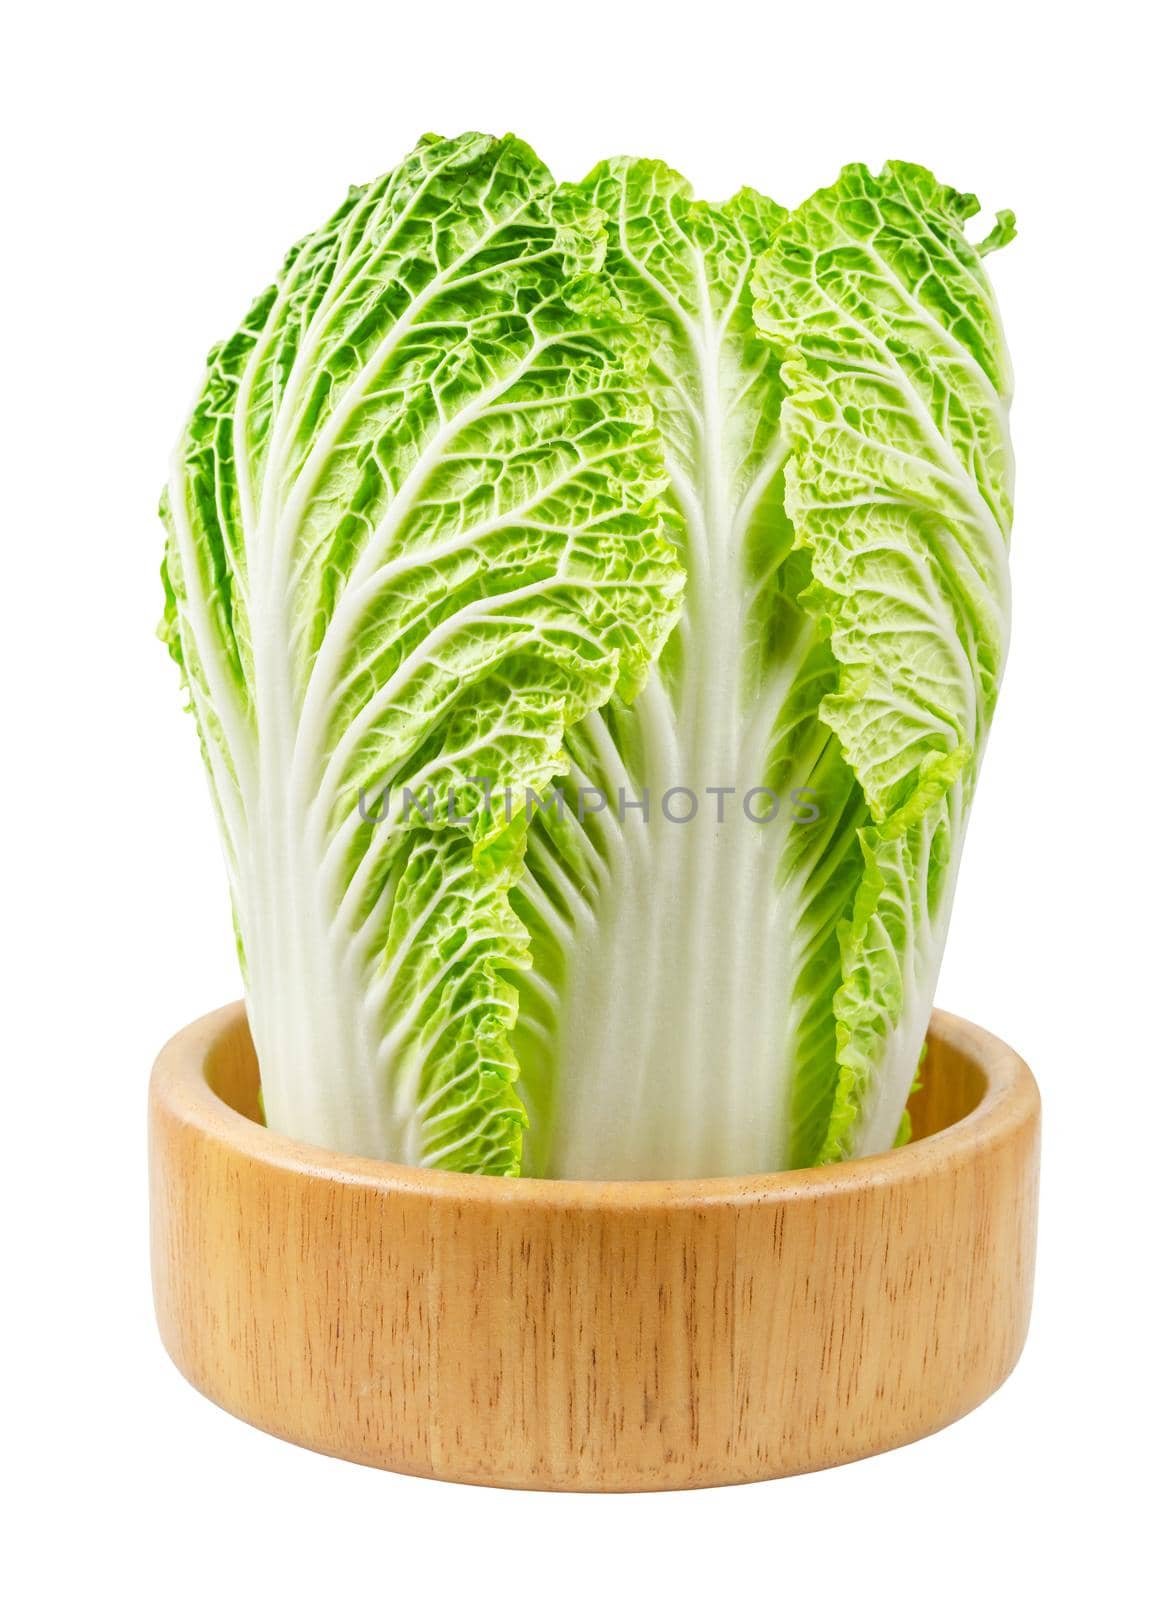 Napa cabbage or chinese cabbage isolated on white background, Save clipping path. by Gamjai